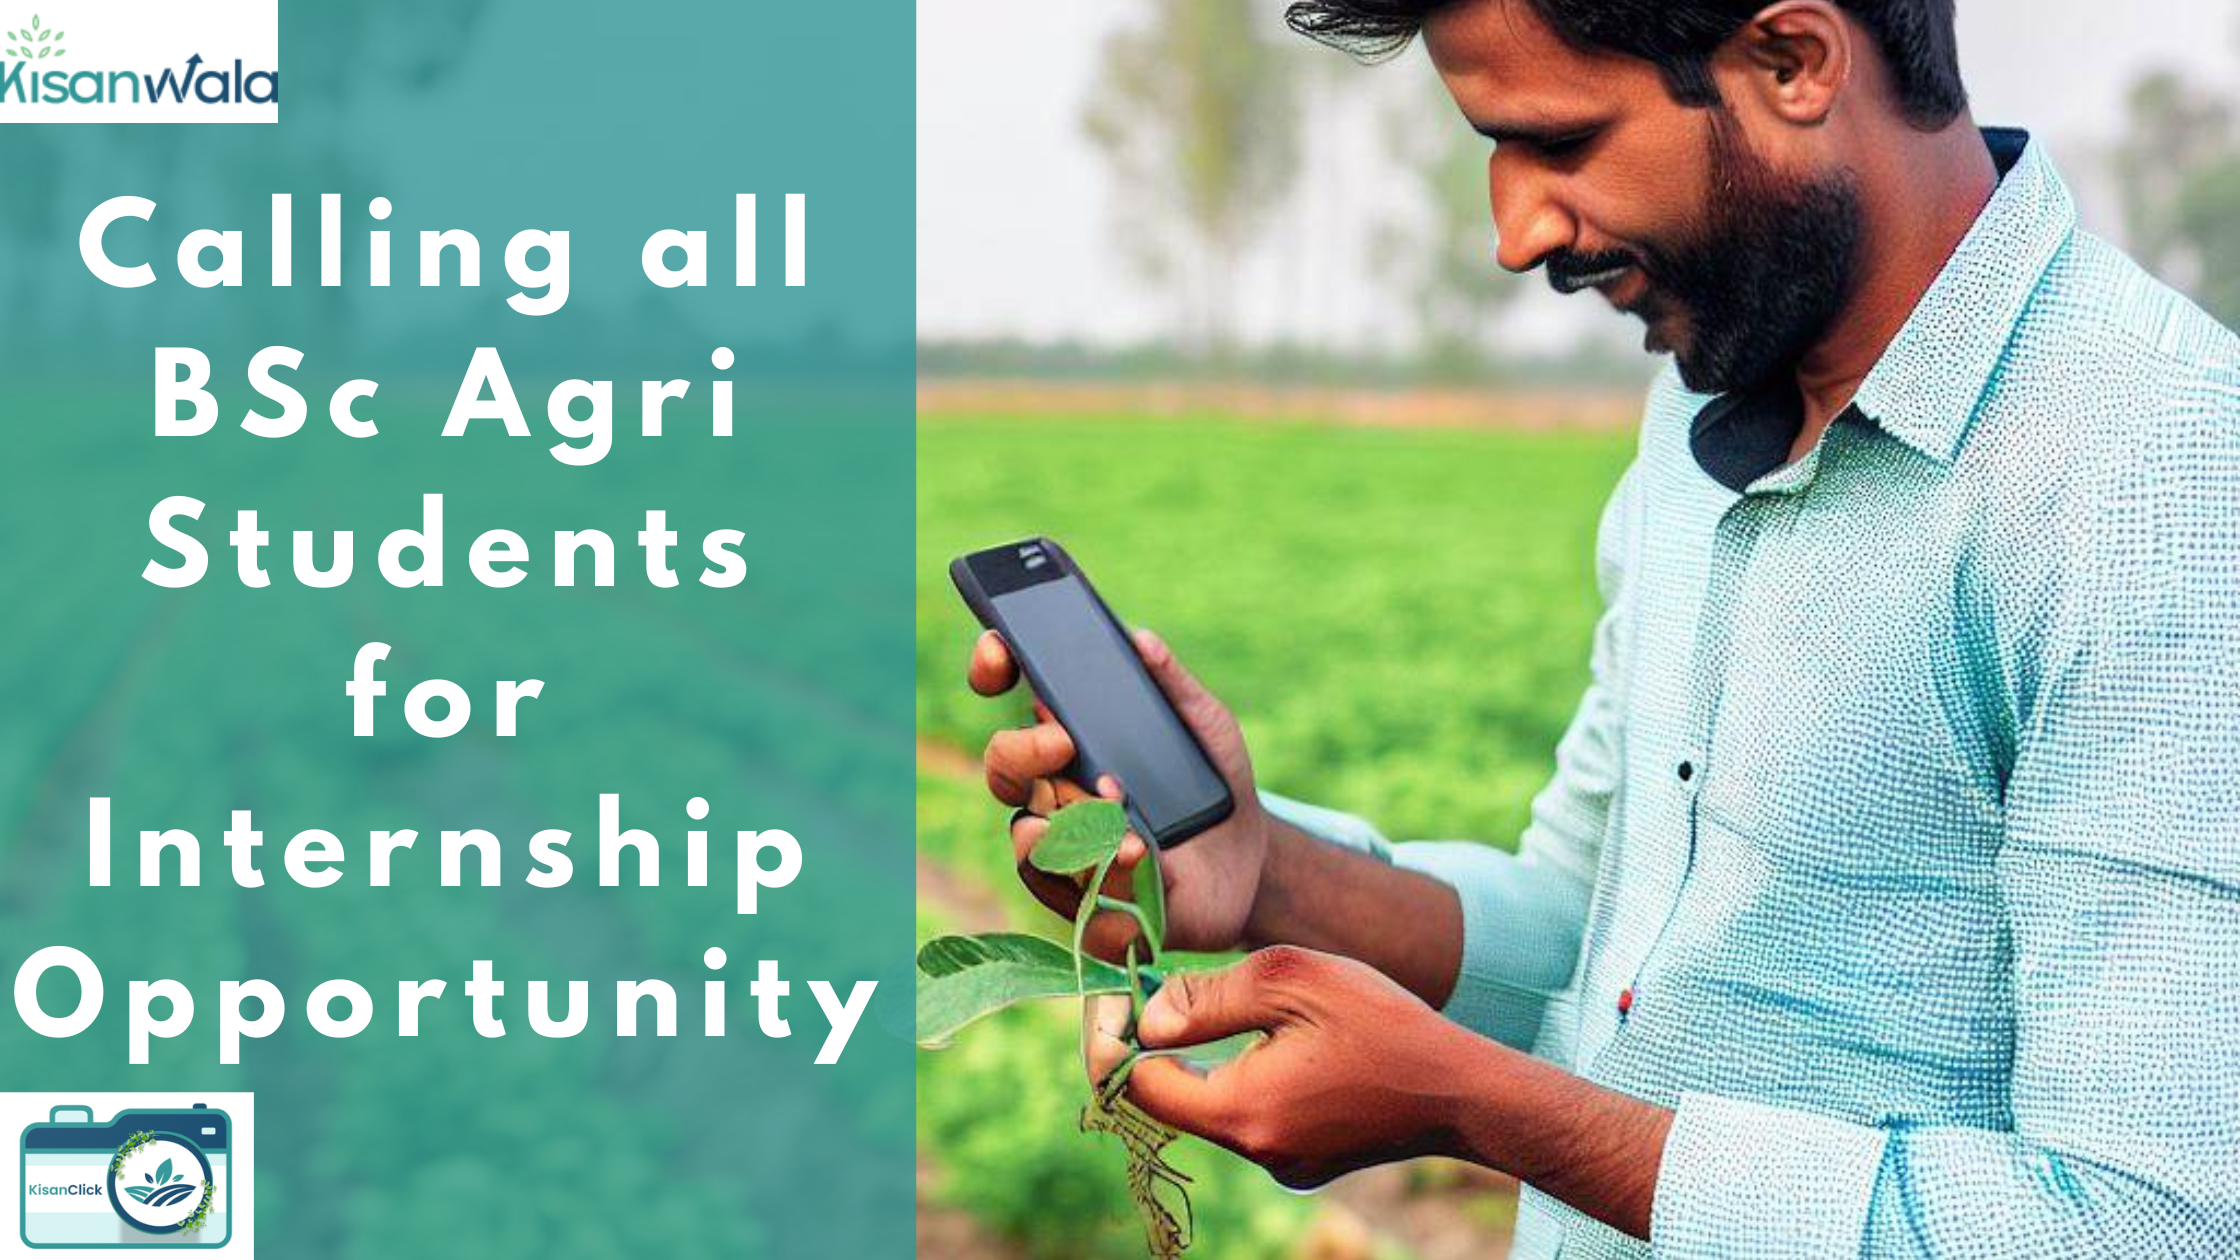 Kisanwala Growth Agri Internship Program: Nurturing Future Agronomists - Unlock Your Potential in BSc Agri Internship Join Our Agricultural Journey from 20th June, 2023.